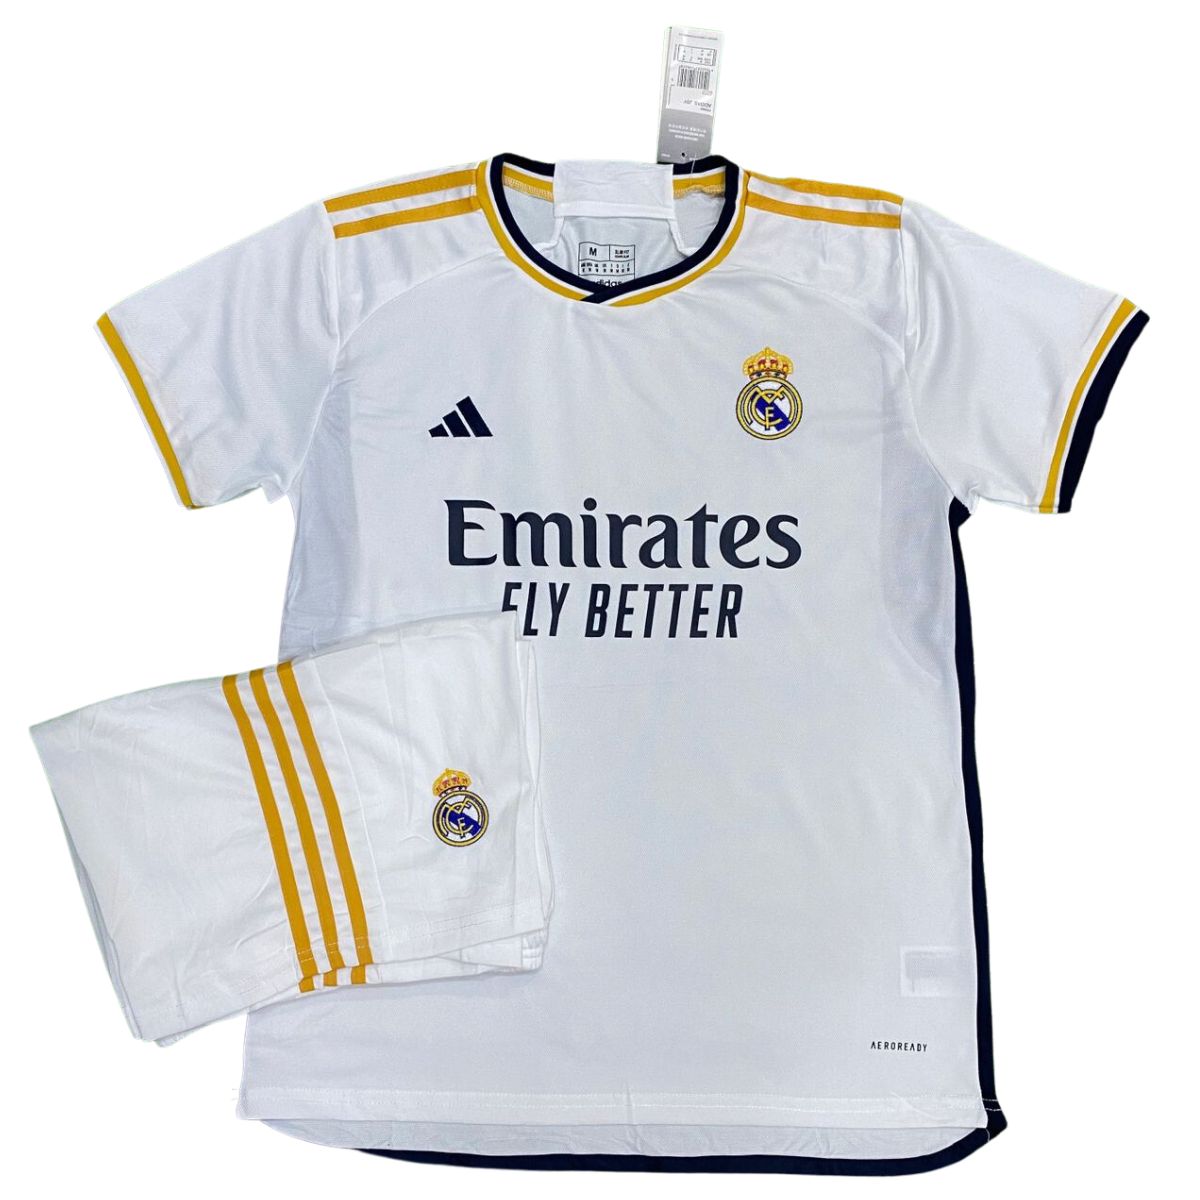 Emirates Fly Better Football Jersey Set (White) – Sports Wing